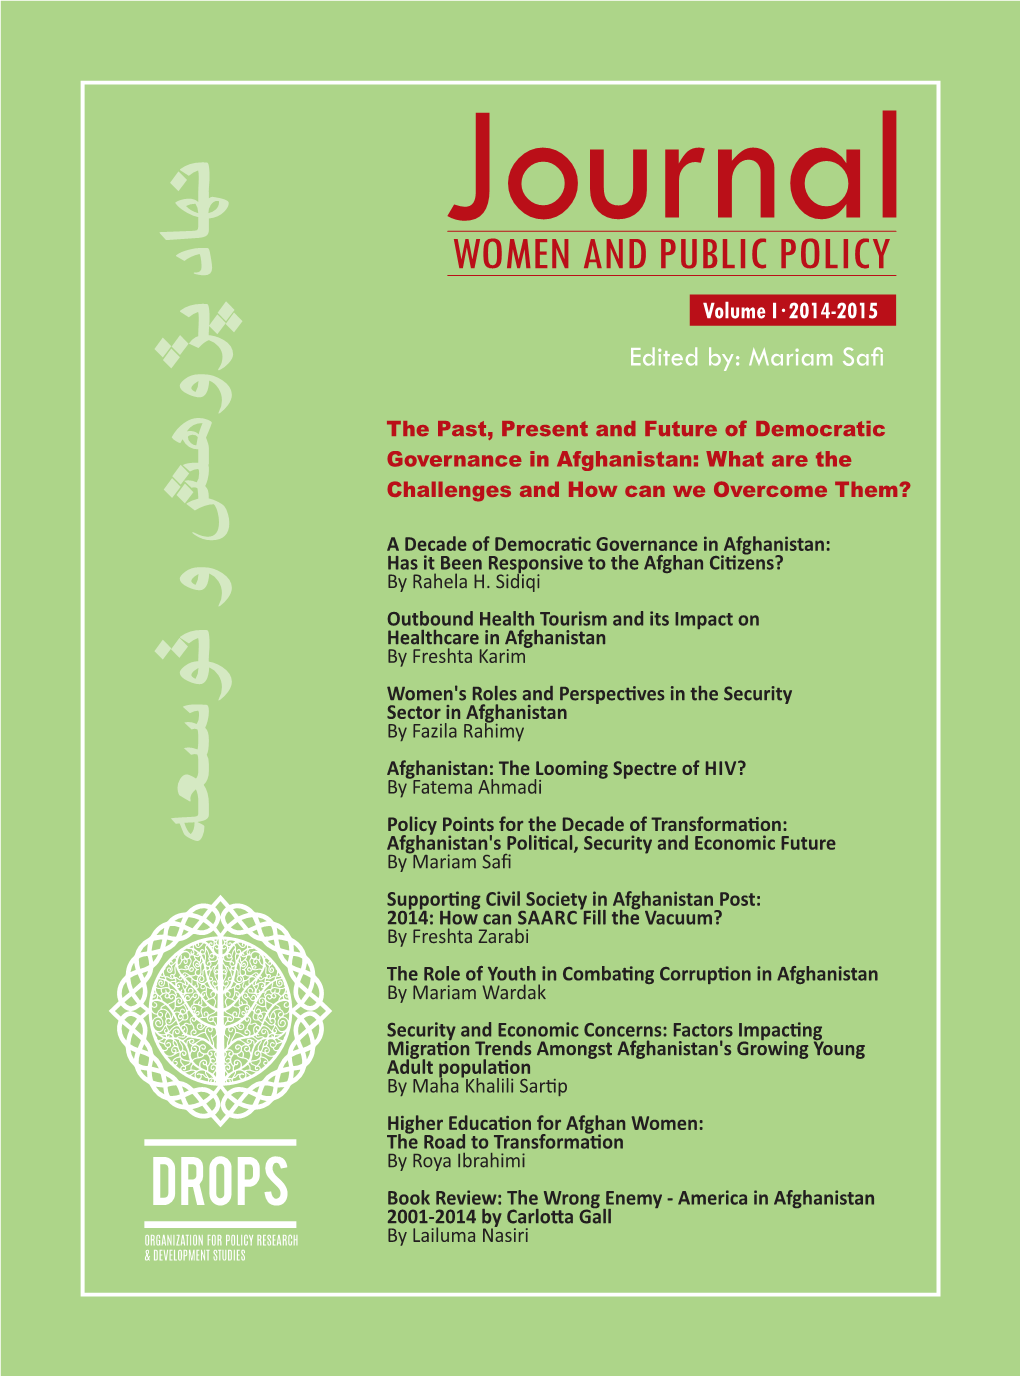 Women and Public Policy Journal September 29, 2015